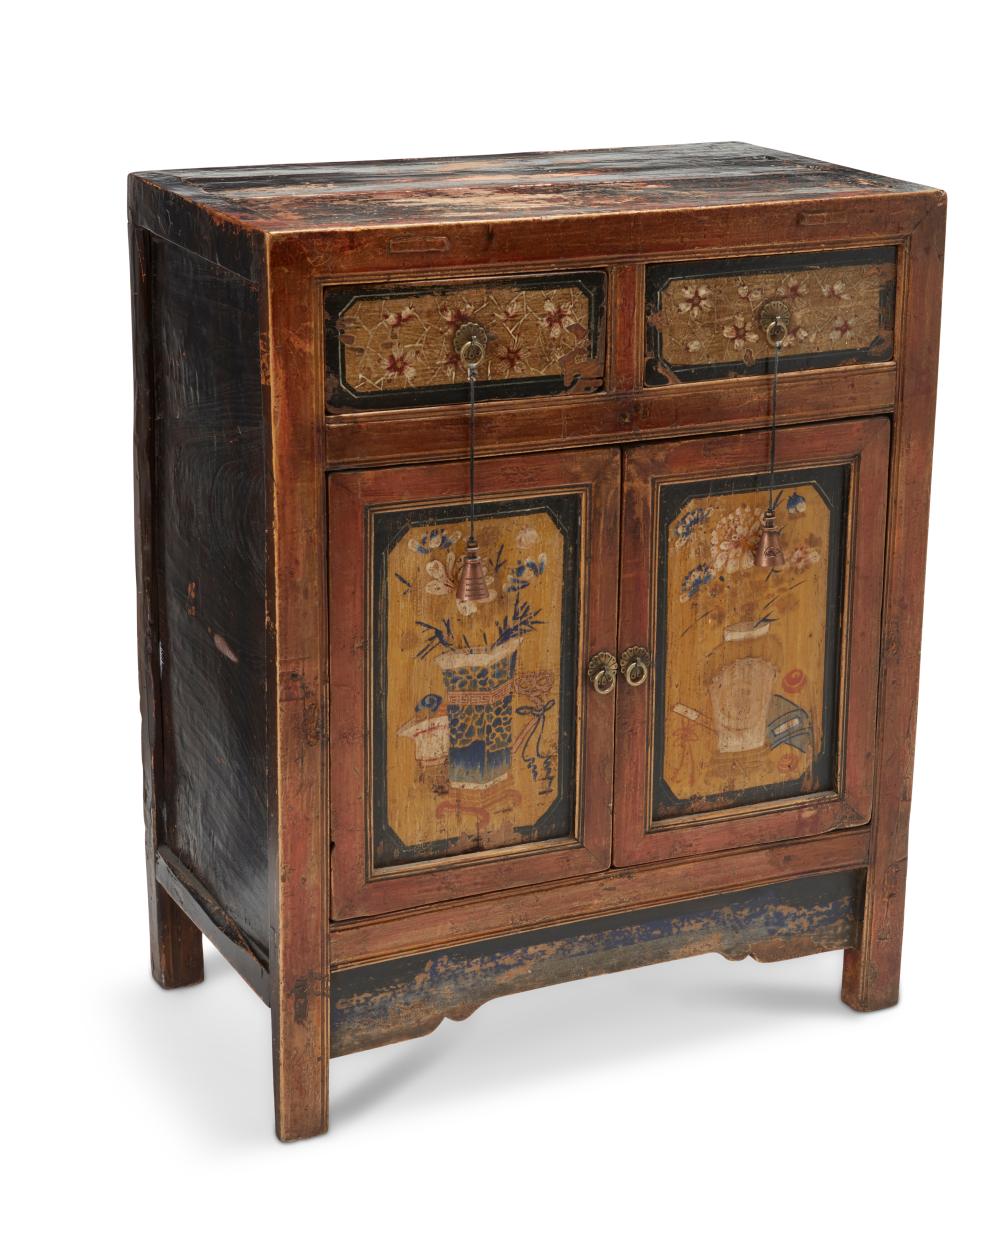 A CHINESE LACQUERED WOOD TEA CABINETA